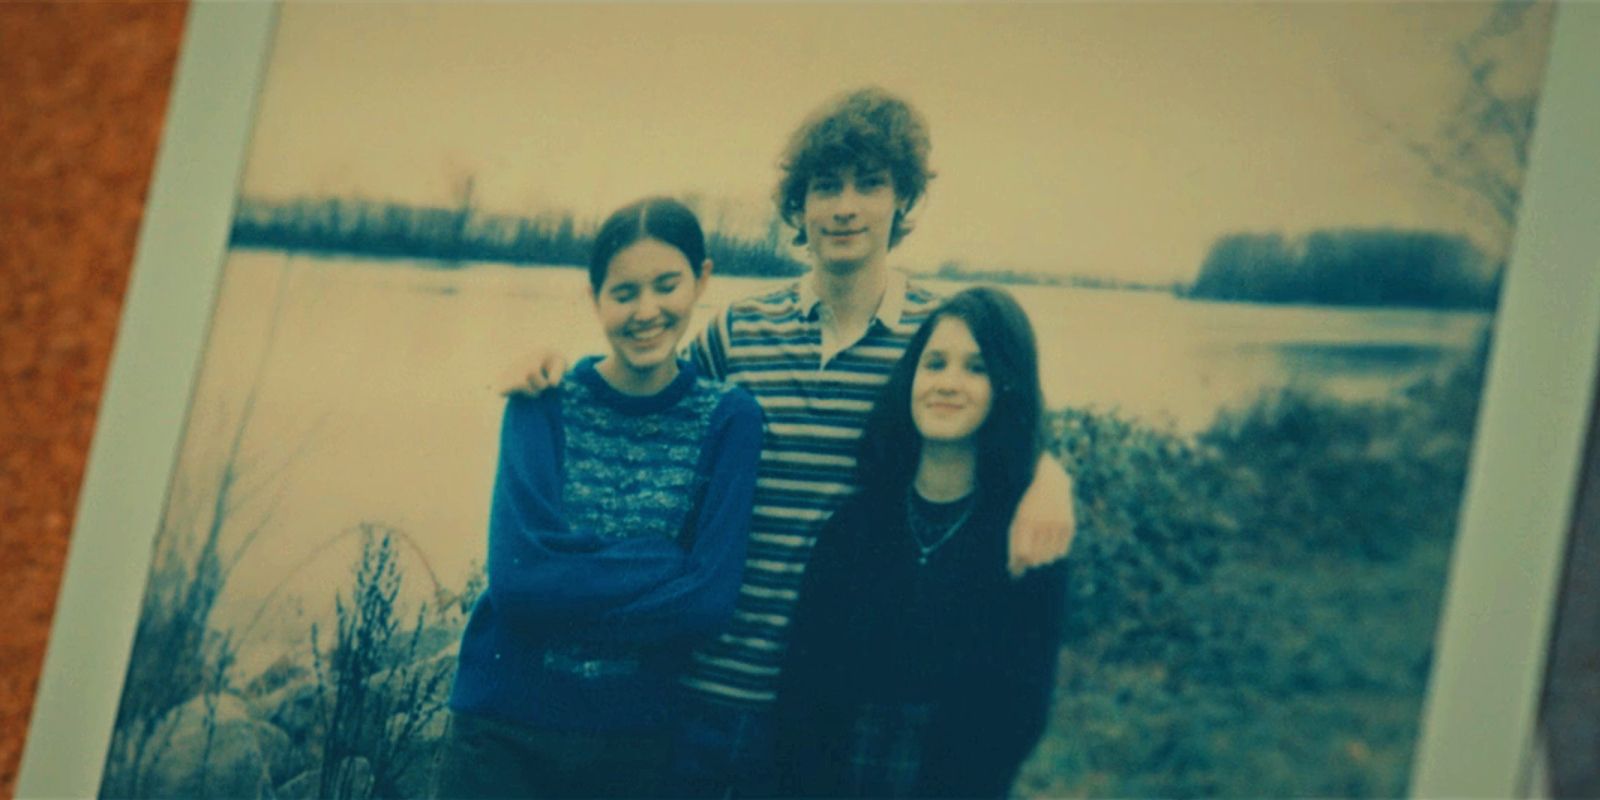 Gabe, Rebecca, and Cam as kids in a polaroid picture in Under the Bridge